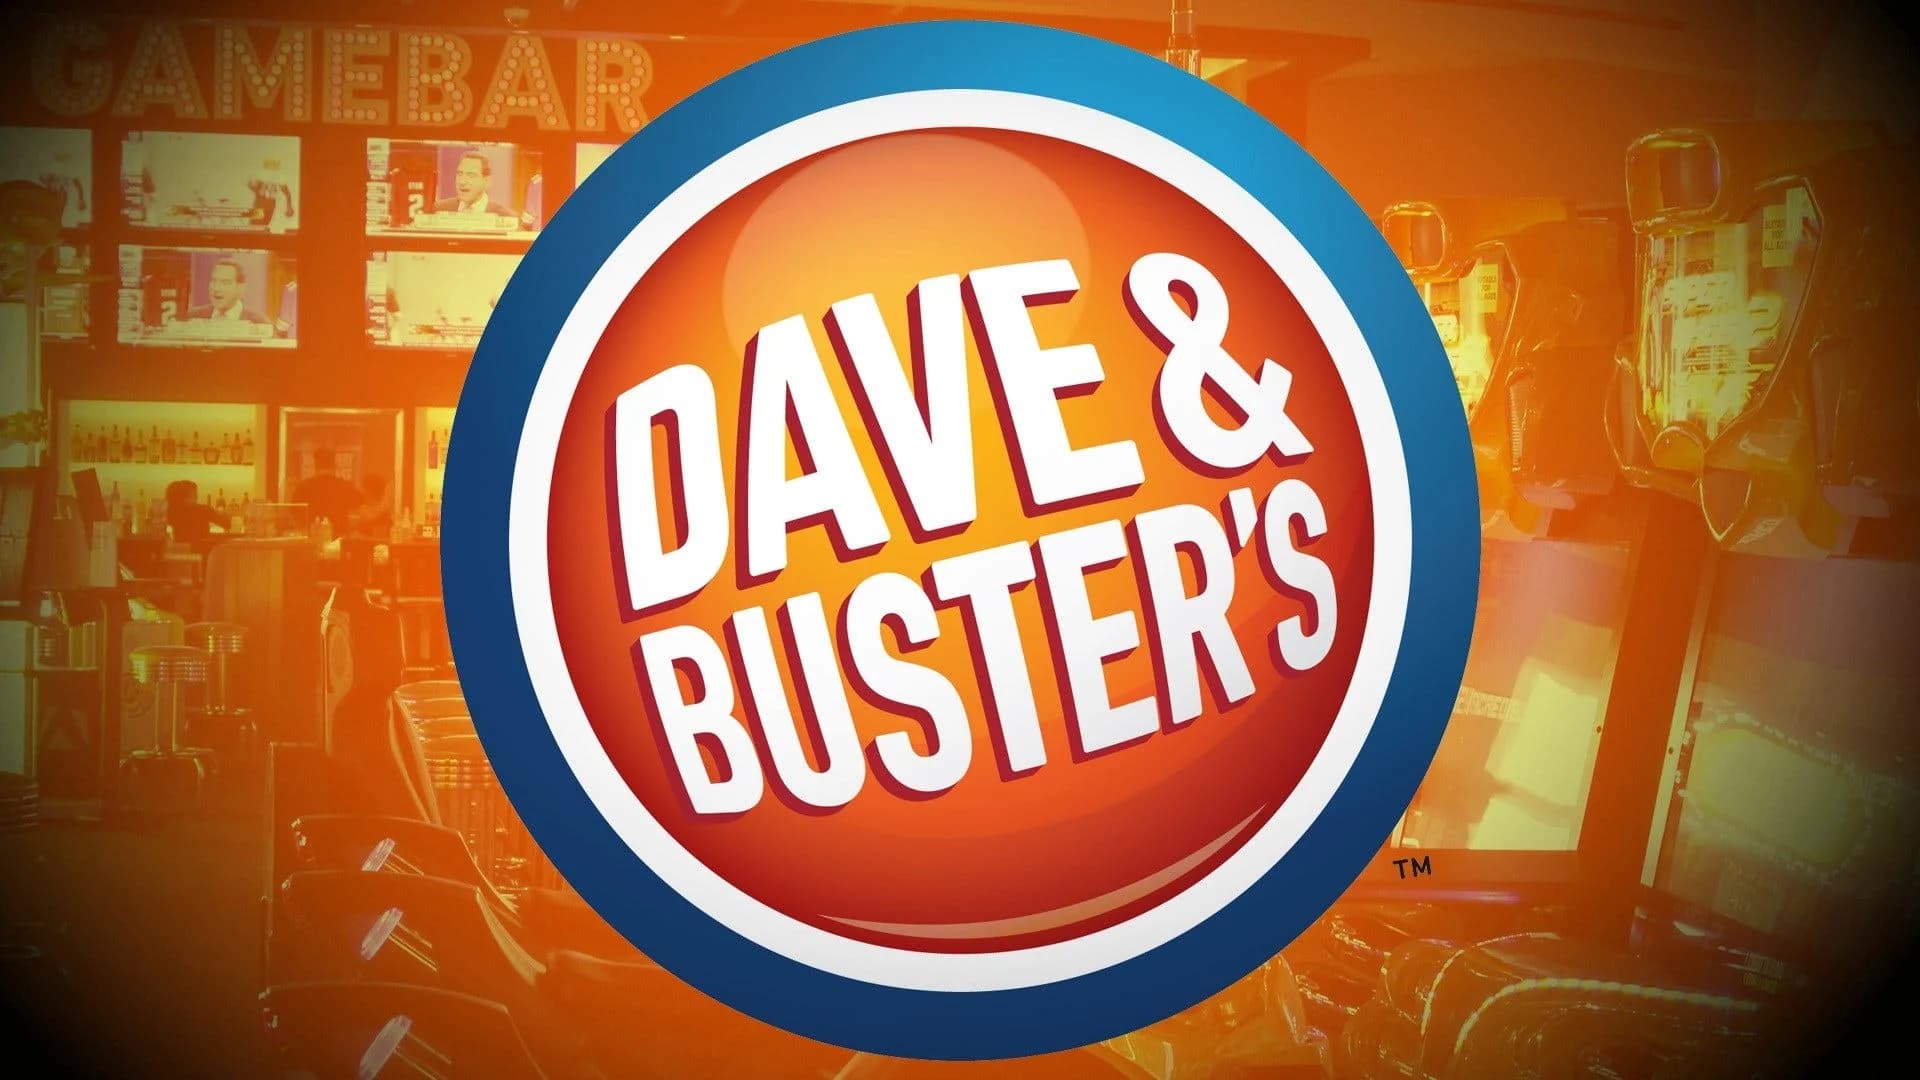 Connecticut Post Mall adding Dave & Busters